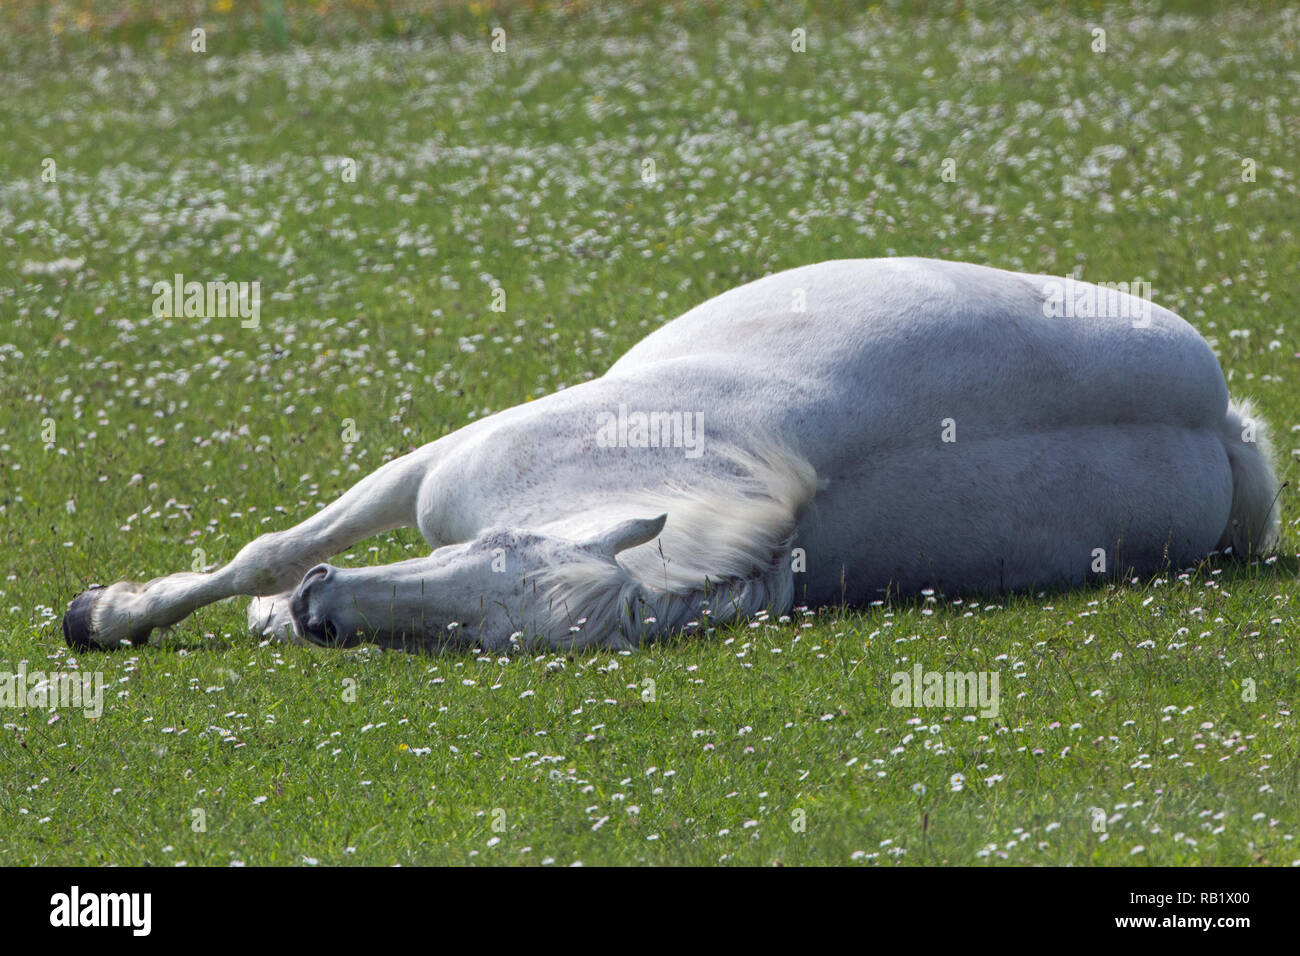 Horse (Equus caballus). Resting, lying down, in the surprising heat of a one-off, hot summer day. Isle of Iona, Inner Hebrides, West coast of Scotland. The UK. June. Stock Photo